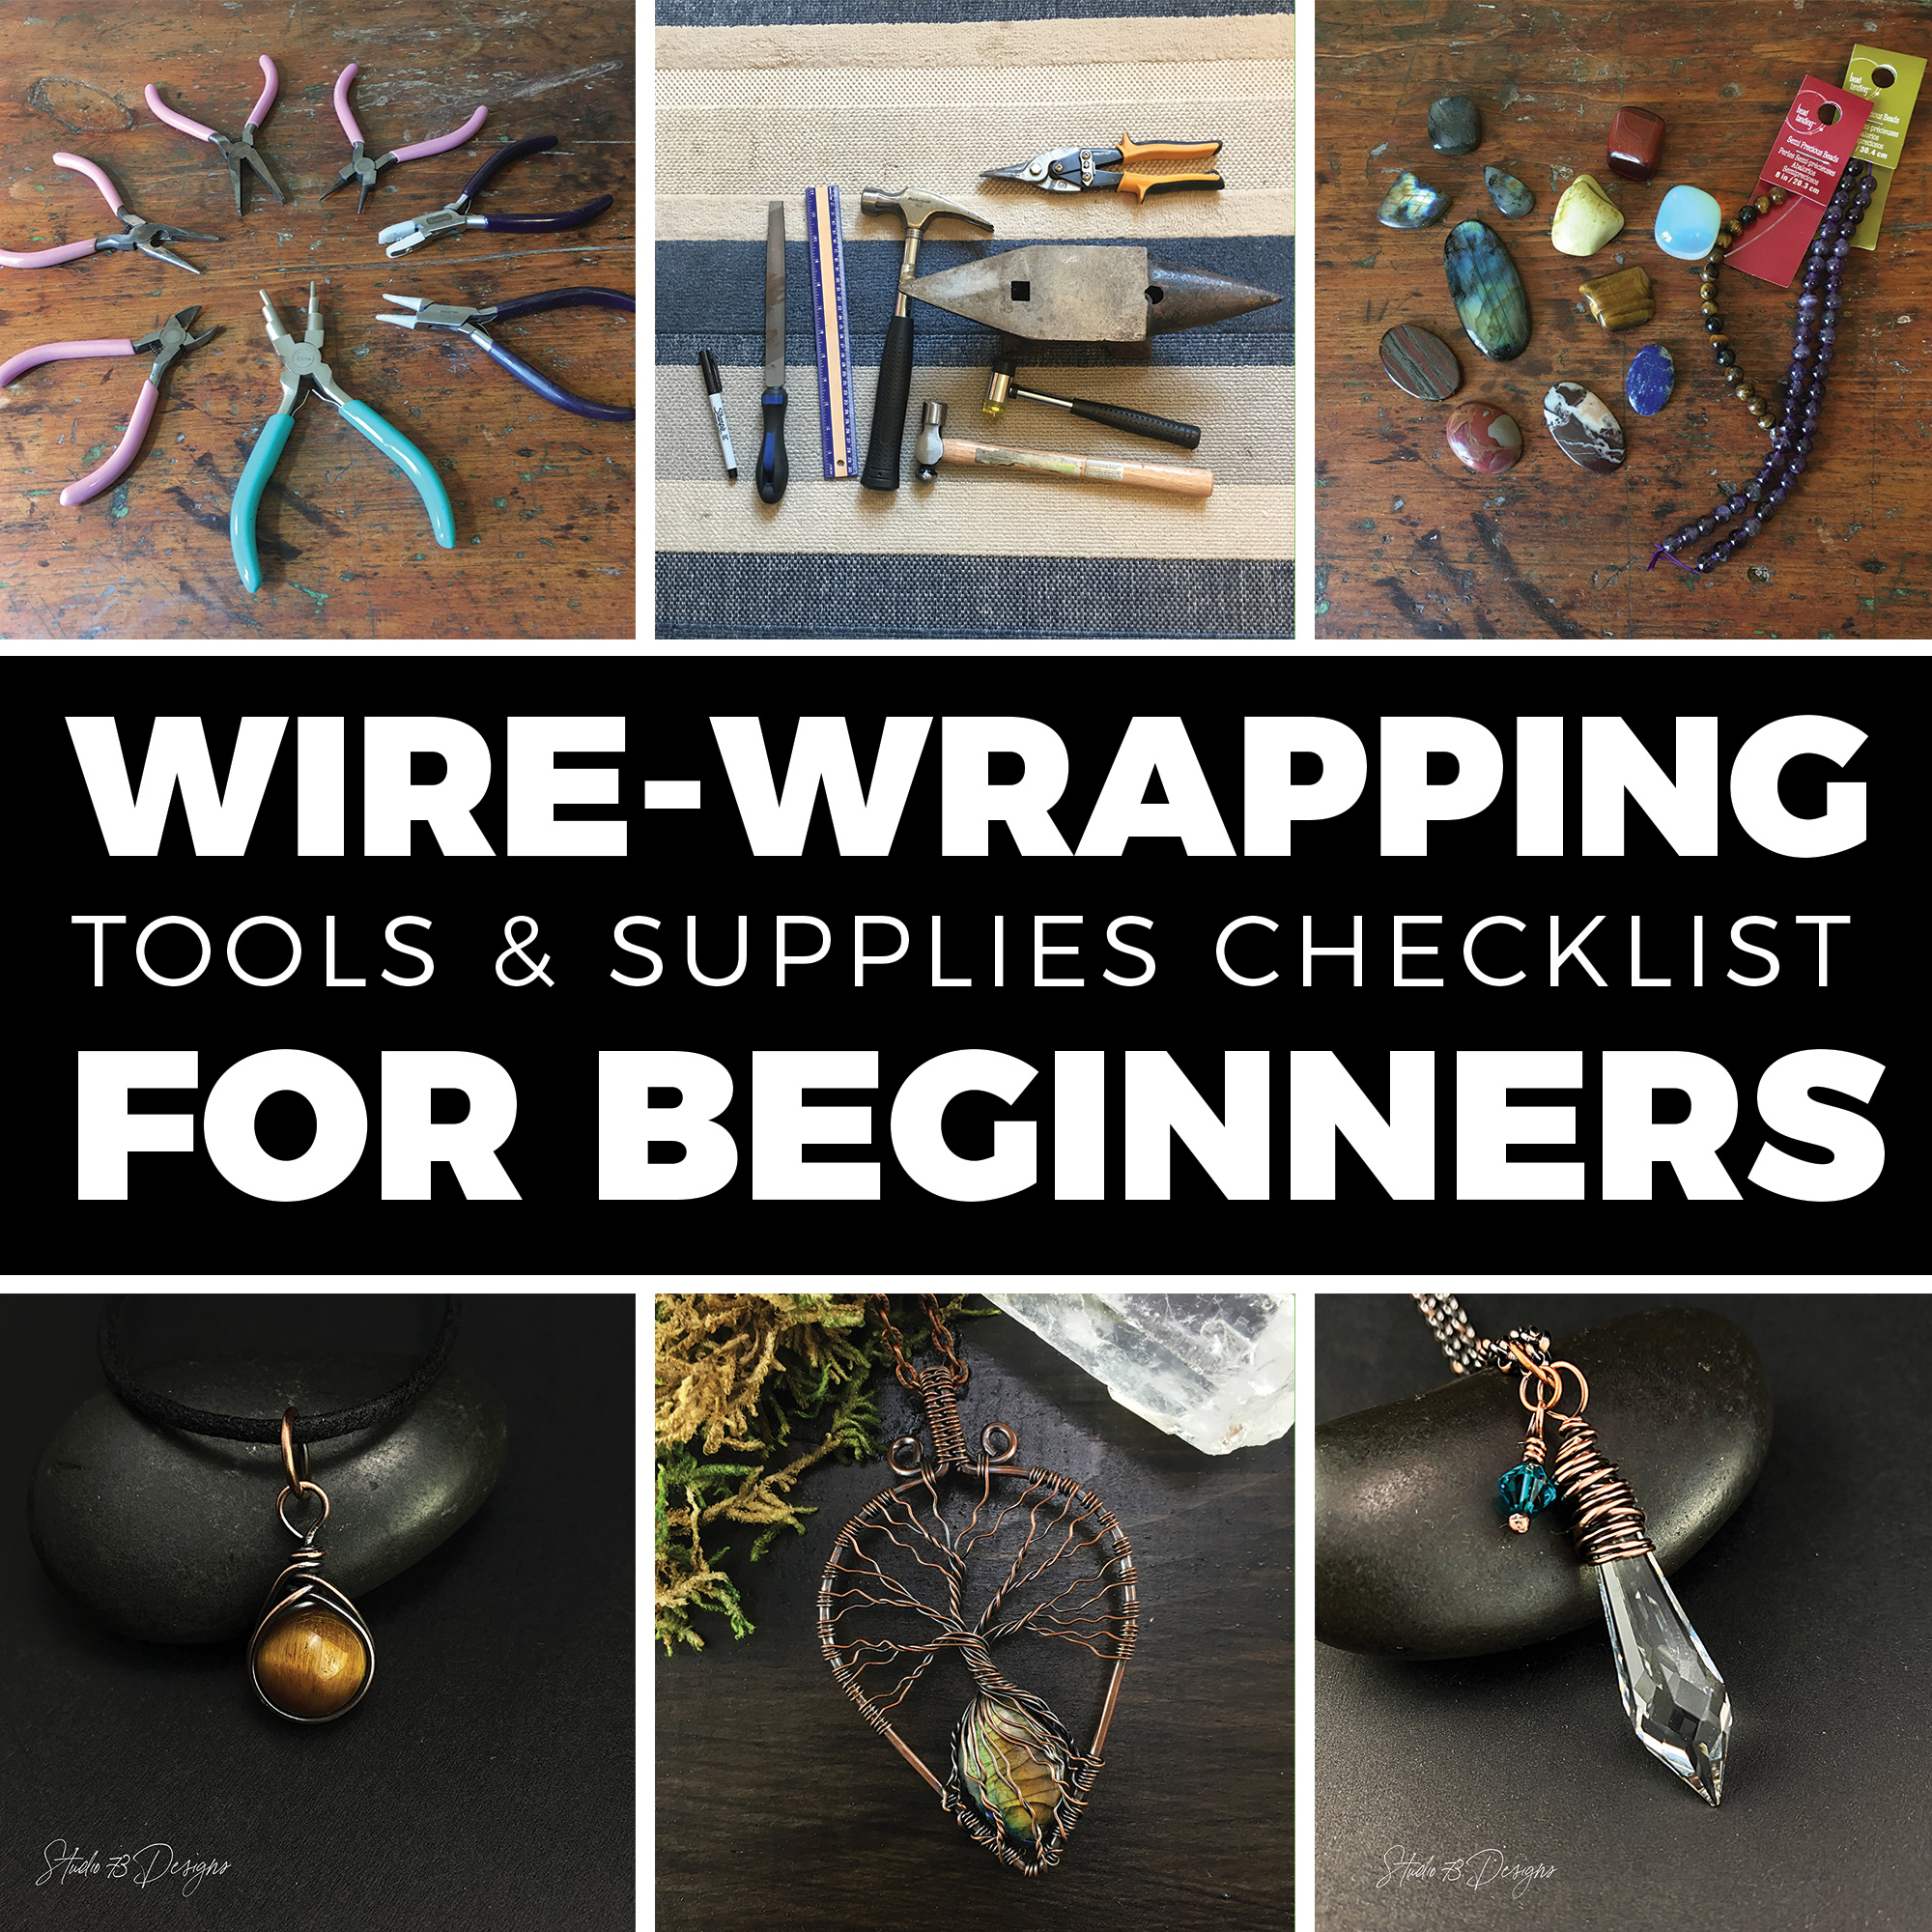 Wire Wrapping Tools amp Supplies for Beginners Carol Philip